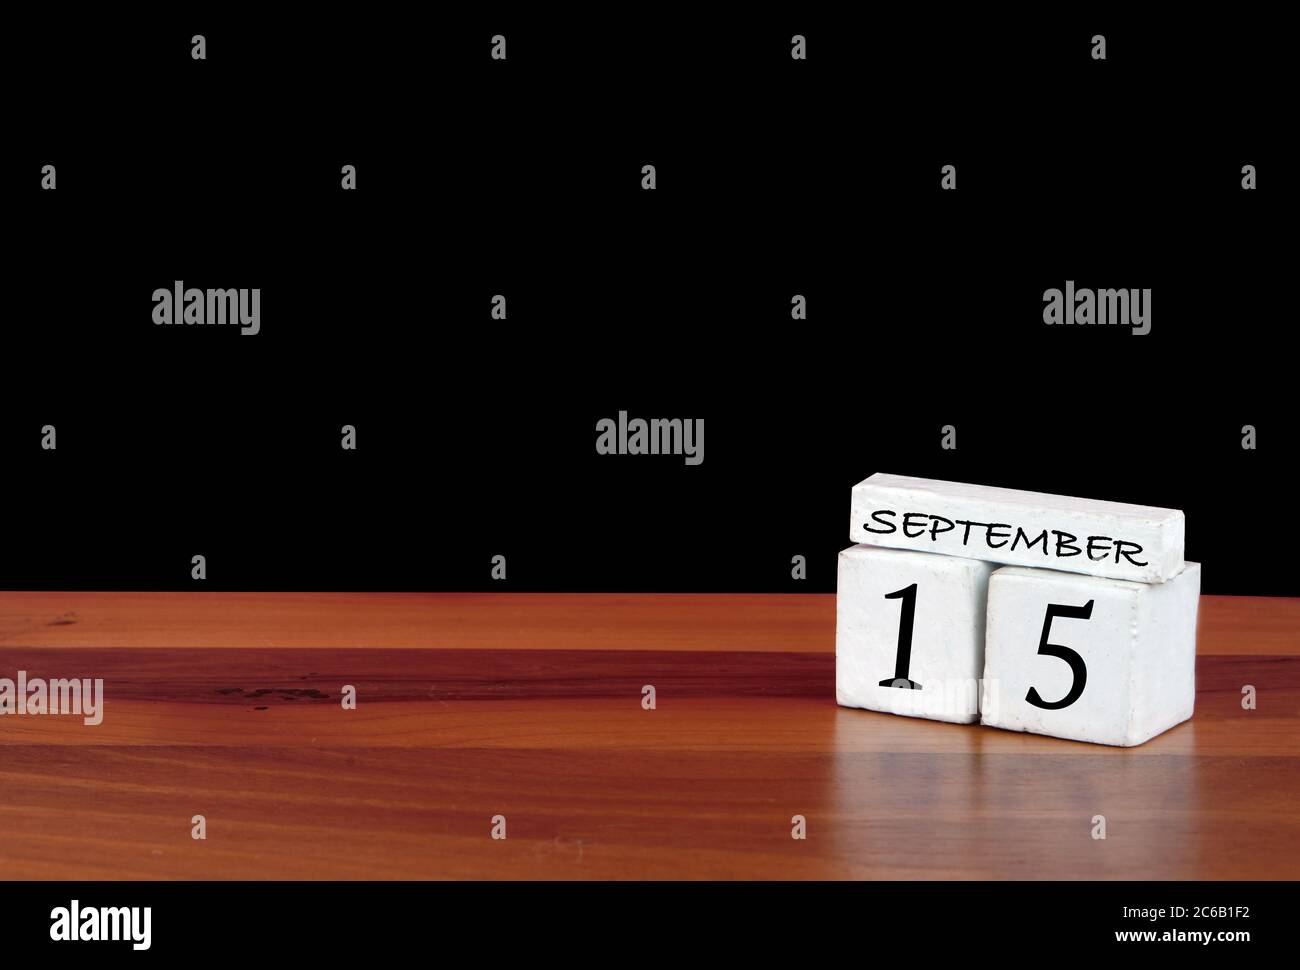 15 September calendar month. 15 days of the month. Reflected calendar on wooden floor with black background Stock Photo